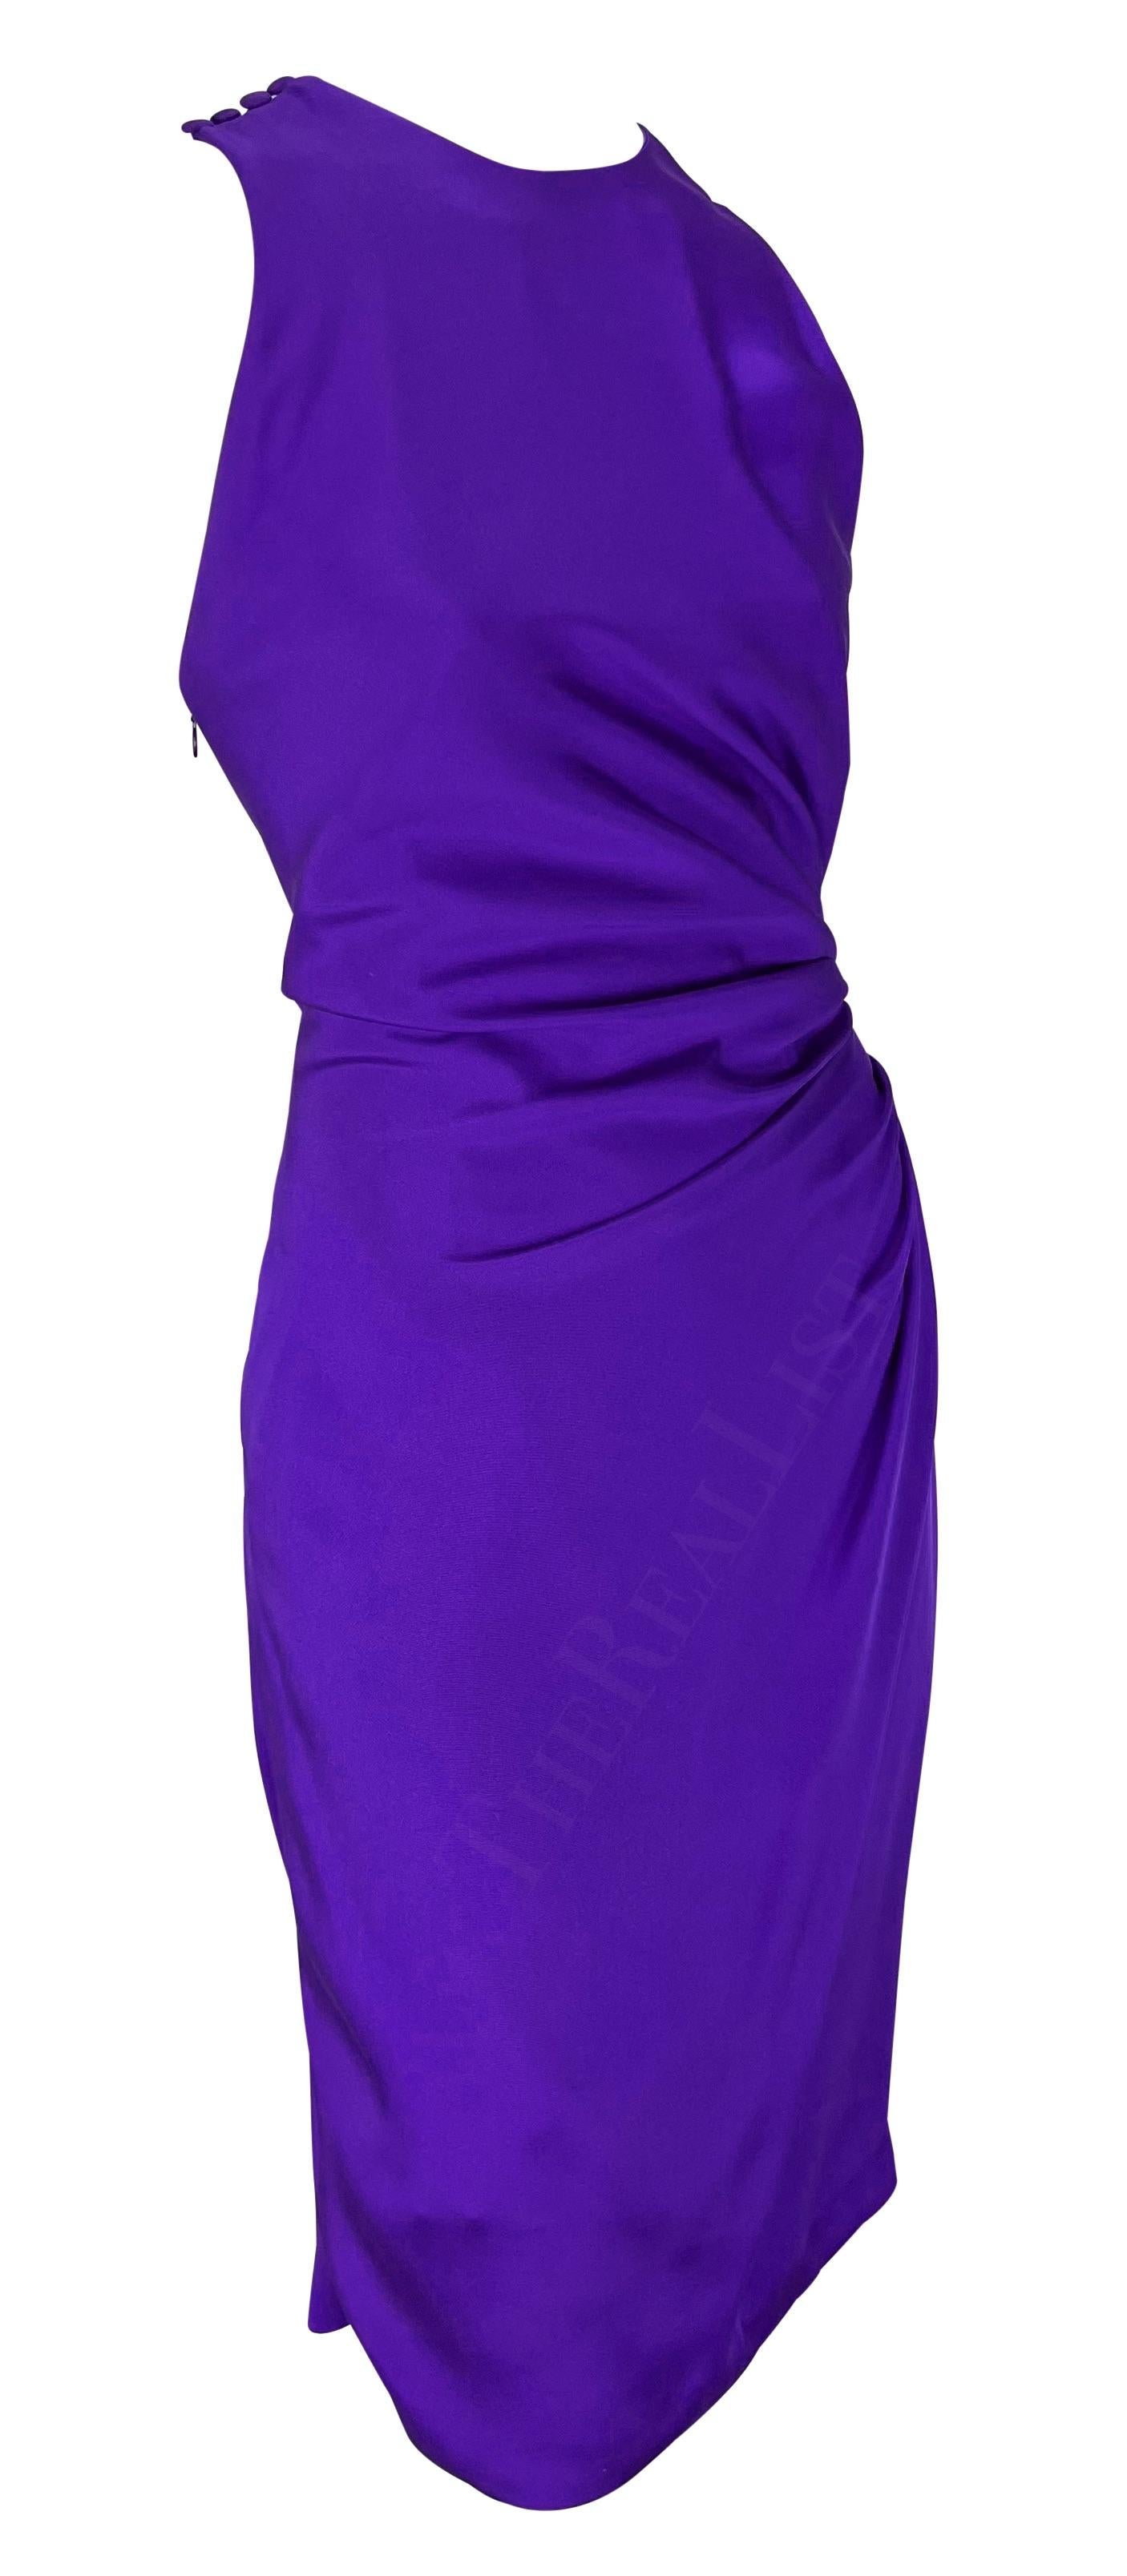 S/S 1991 Gianni Versace Purple Gathered Ruched Sleeveless Cocktail Dress en vente 2